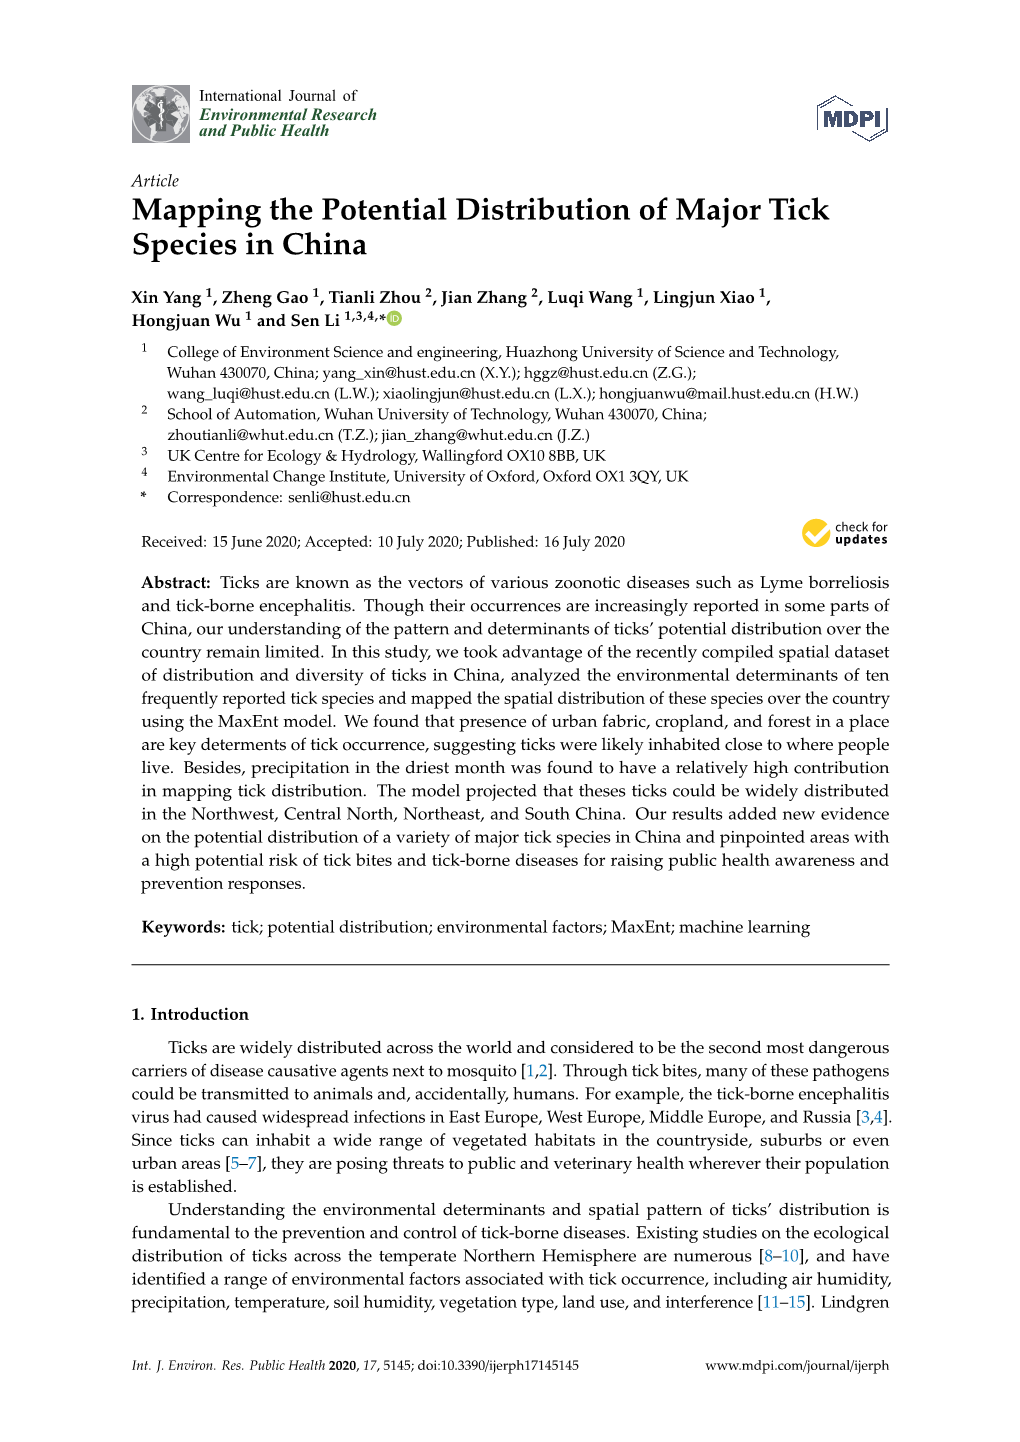 Mapping the Potential Distribution of Major Tick Species in China